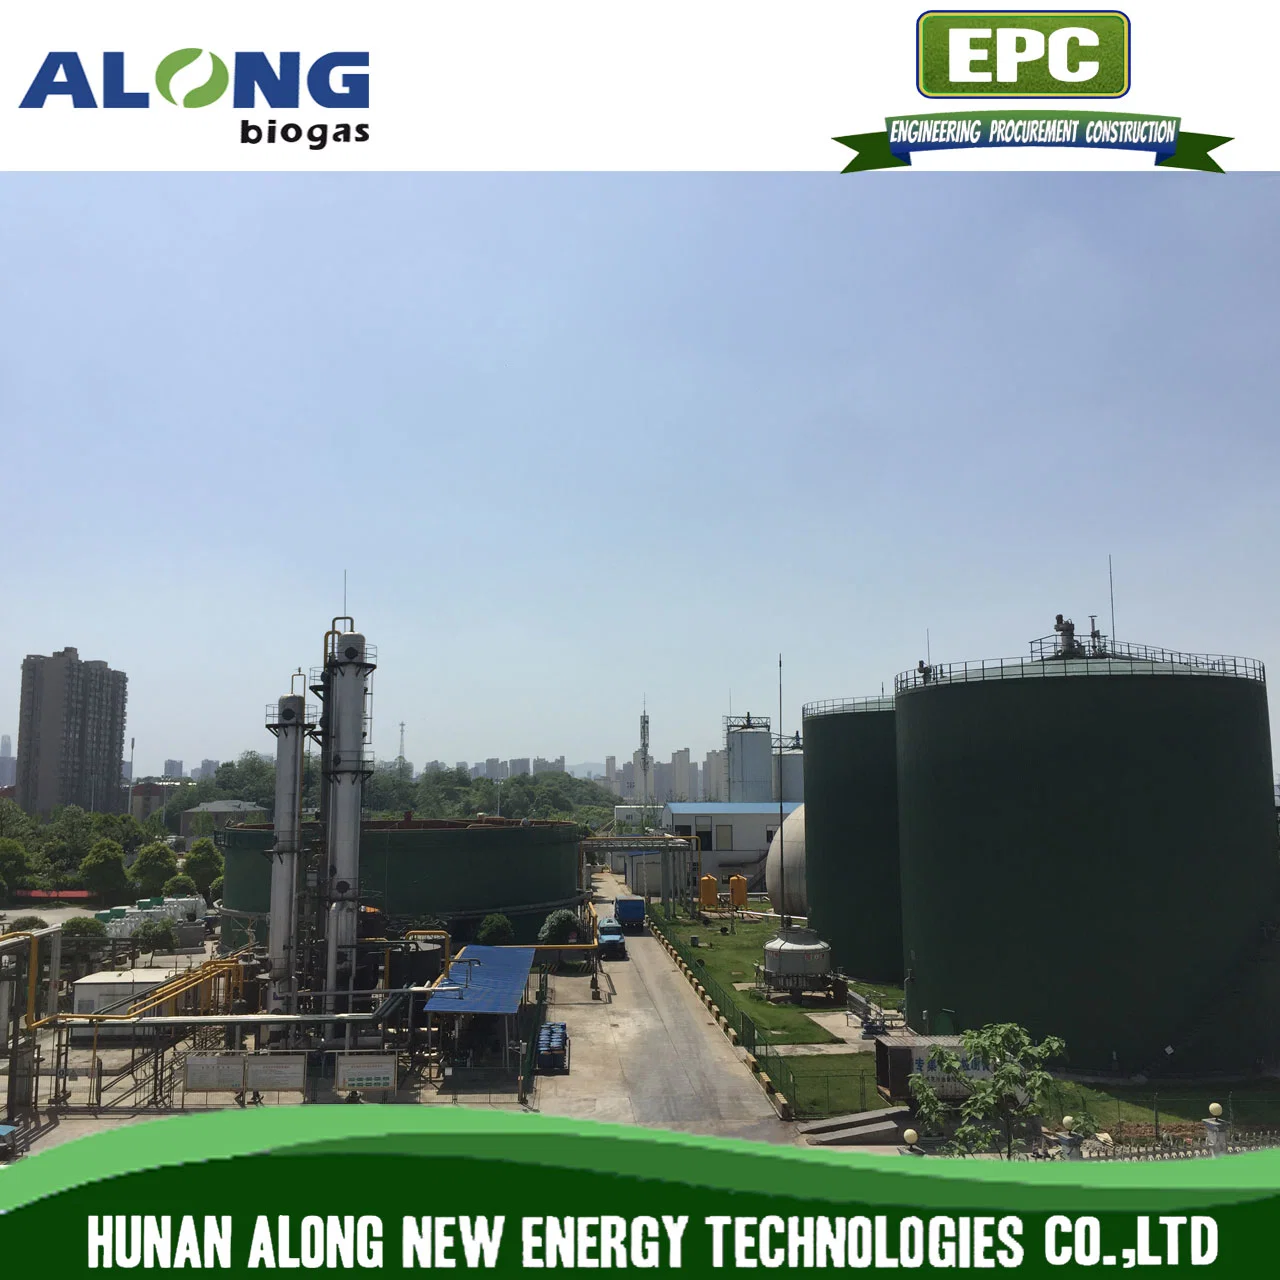 Biogas Project-Complete System From Waste to Energy